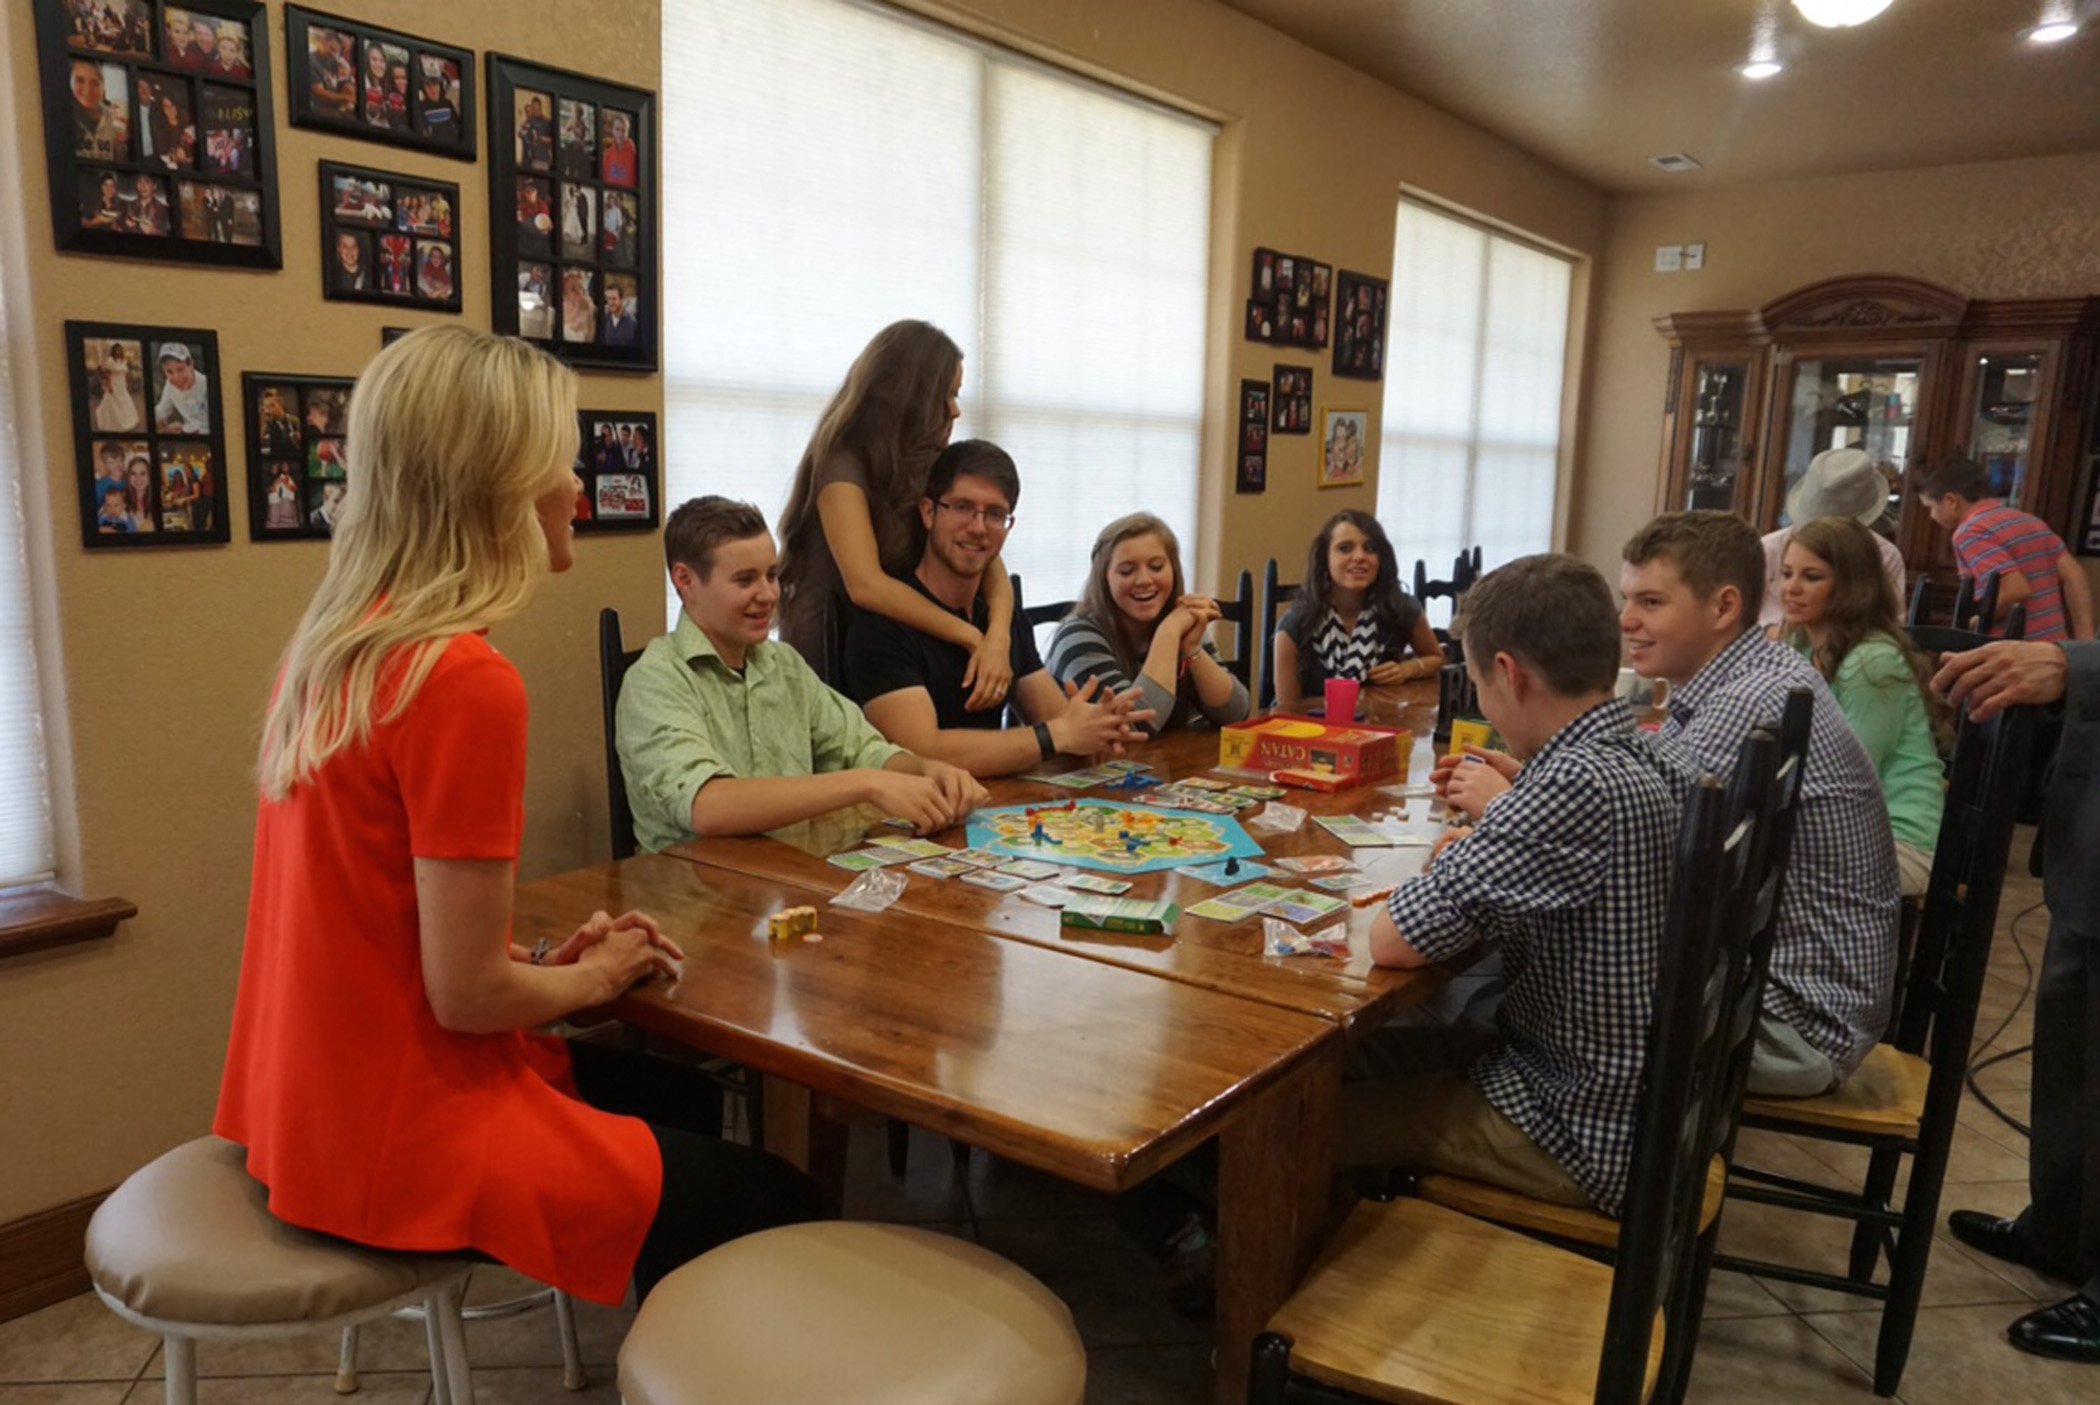 Megyn Kelly sits down with the Duggar children of the TLC program '19 Kids and Counting' at their home in Tontitown, Arkansas